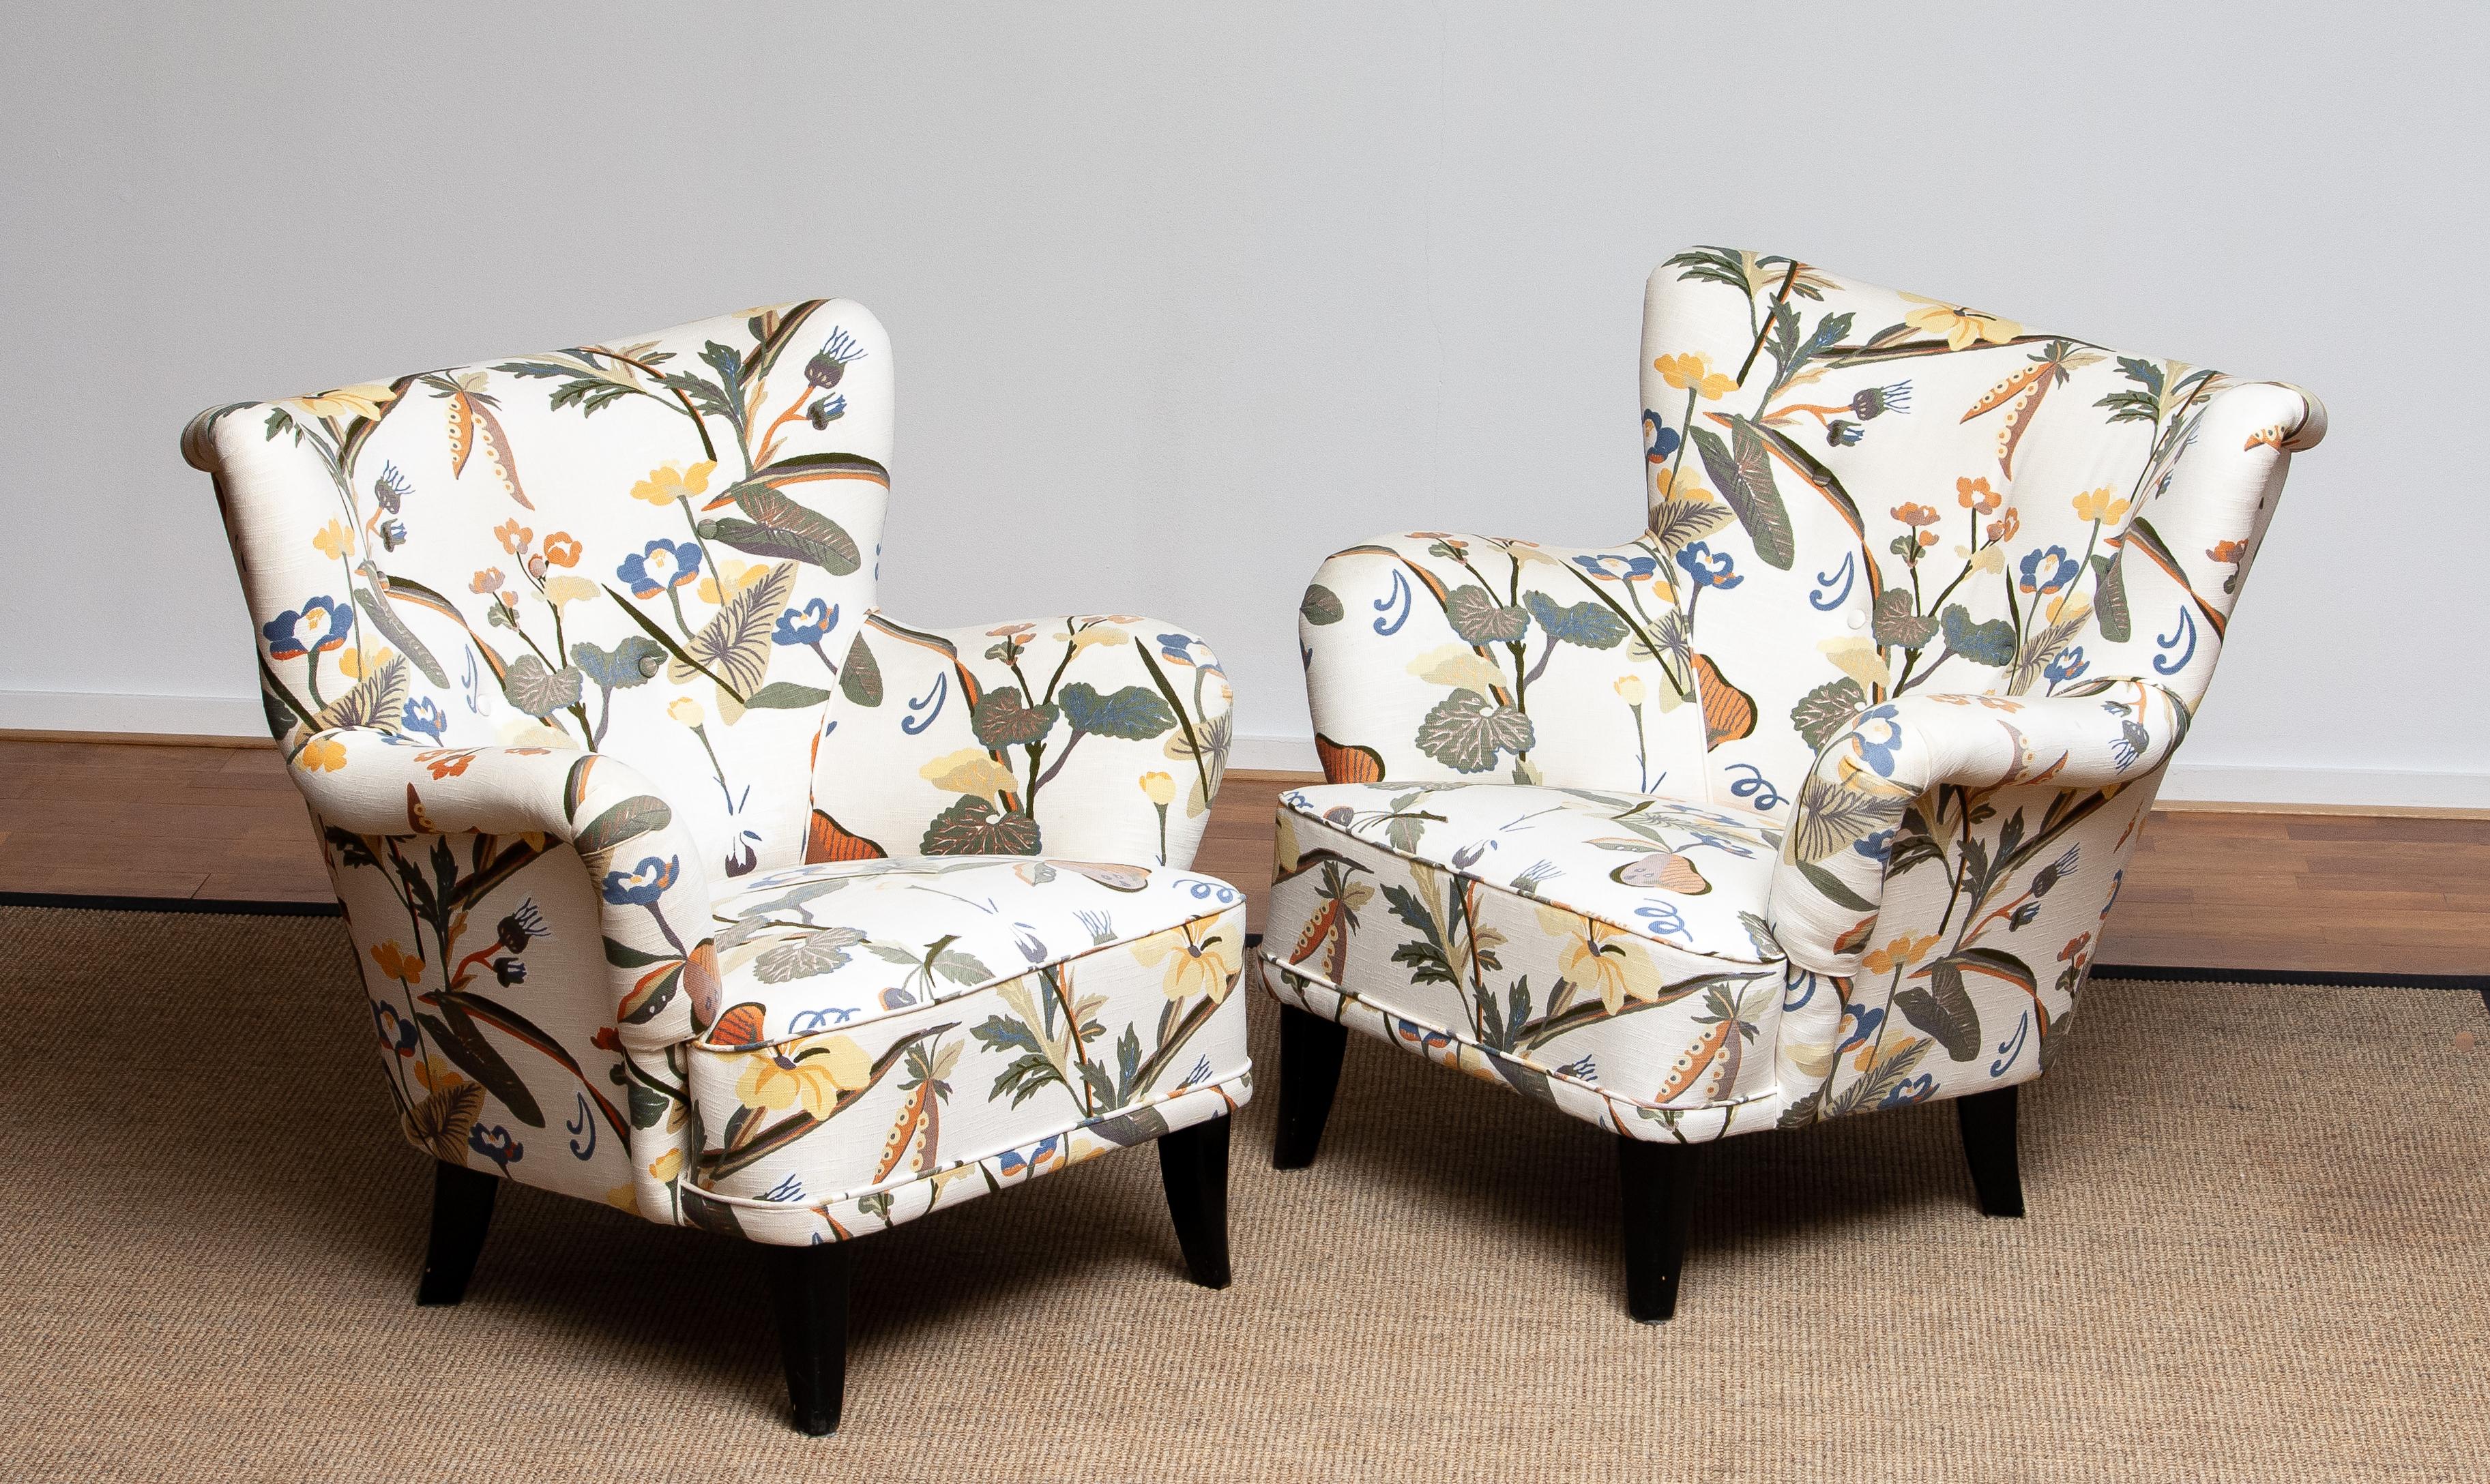 Mid-20th Century Lounge/Easy Chairs by Ilmari Lappalainen for Asko with Josef Frank Fabric, Pair